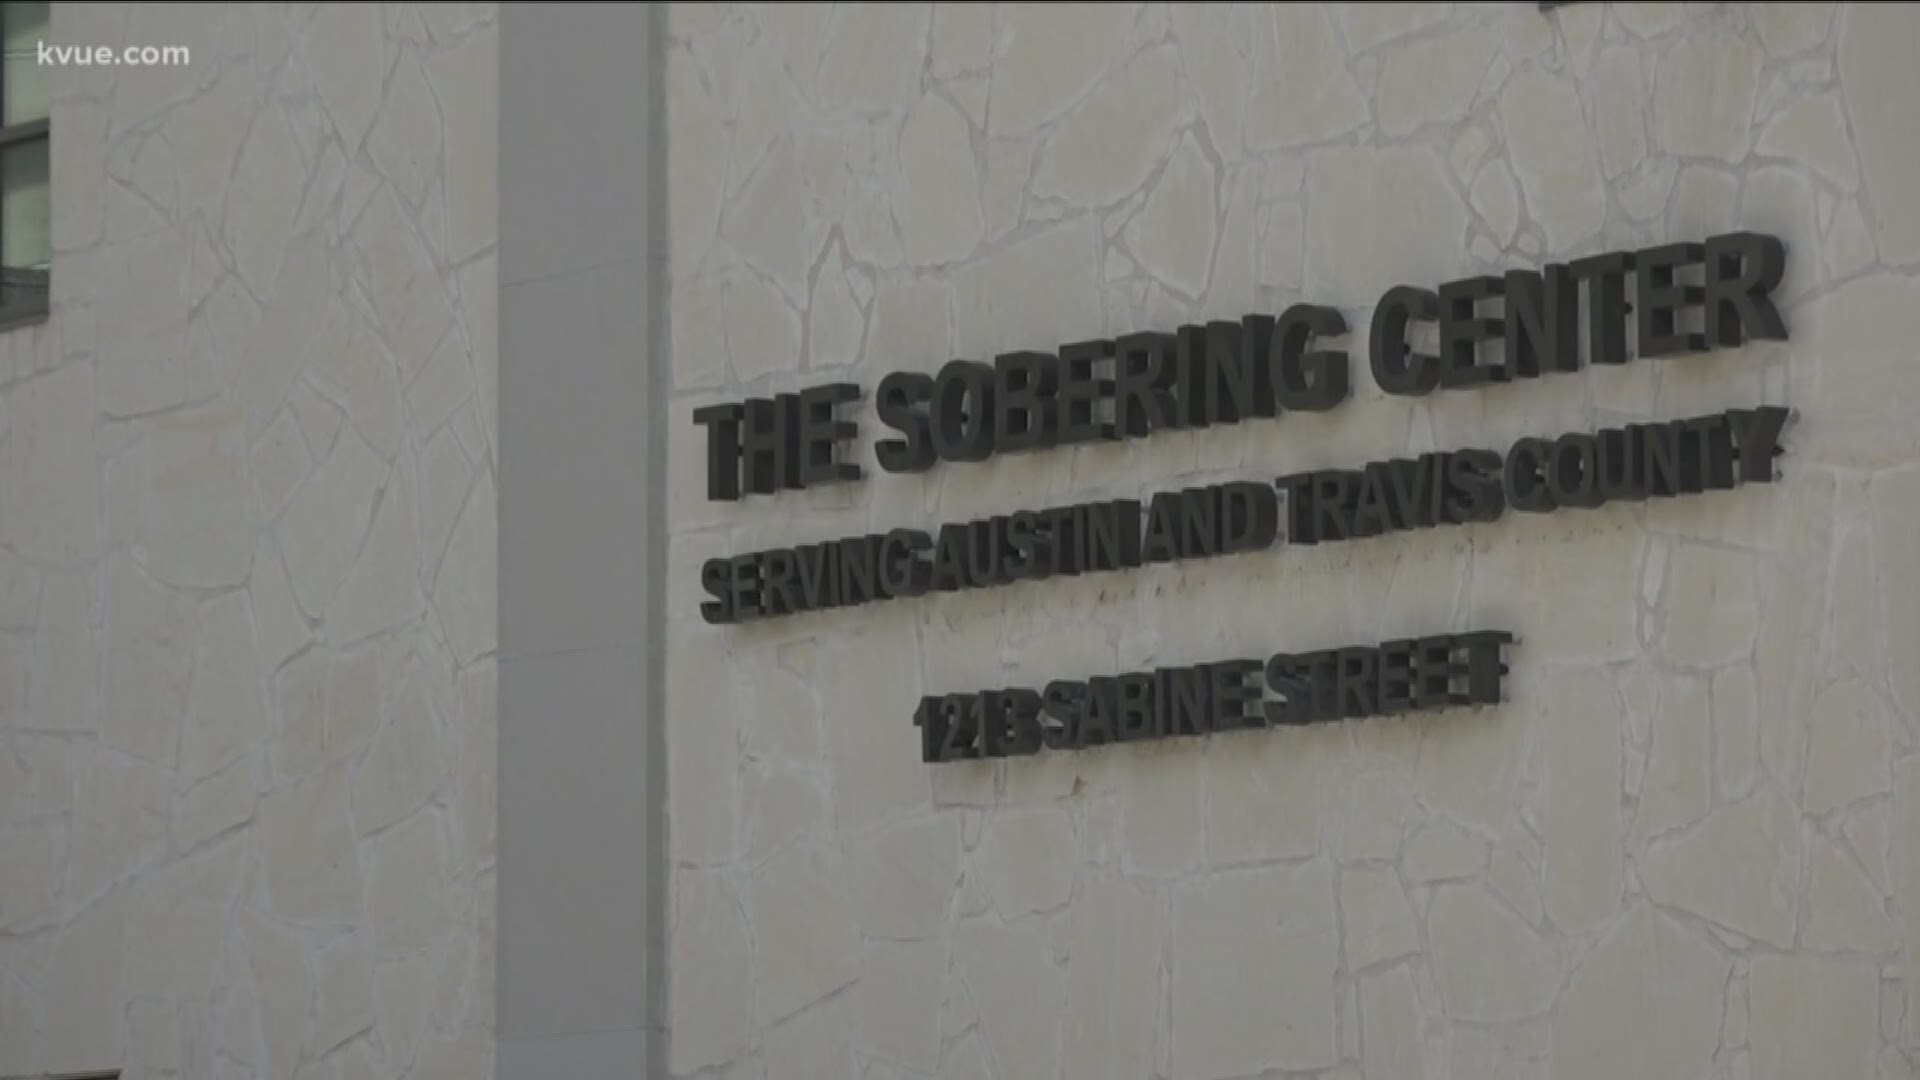 The Sobering Center in Downtown Austin will now be available for quarantine space.